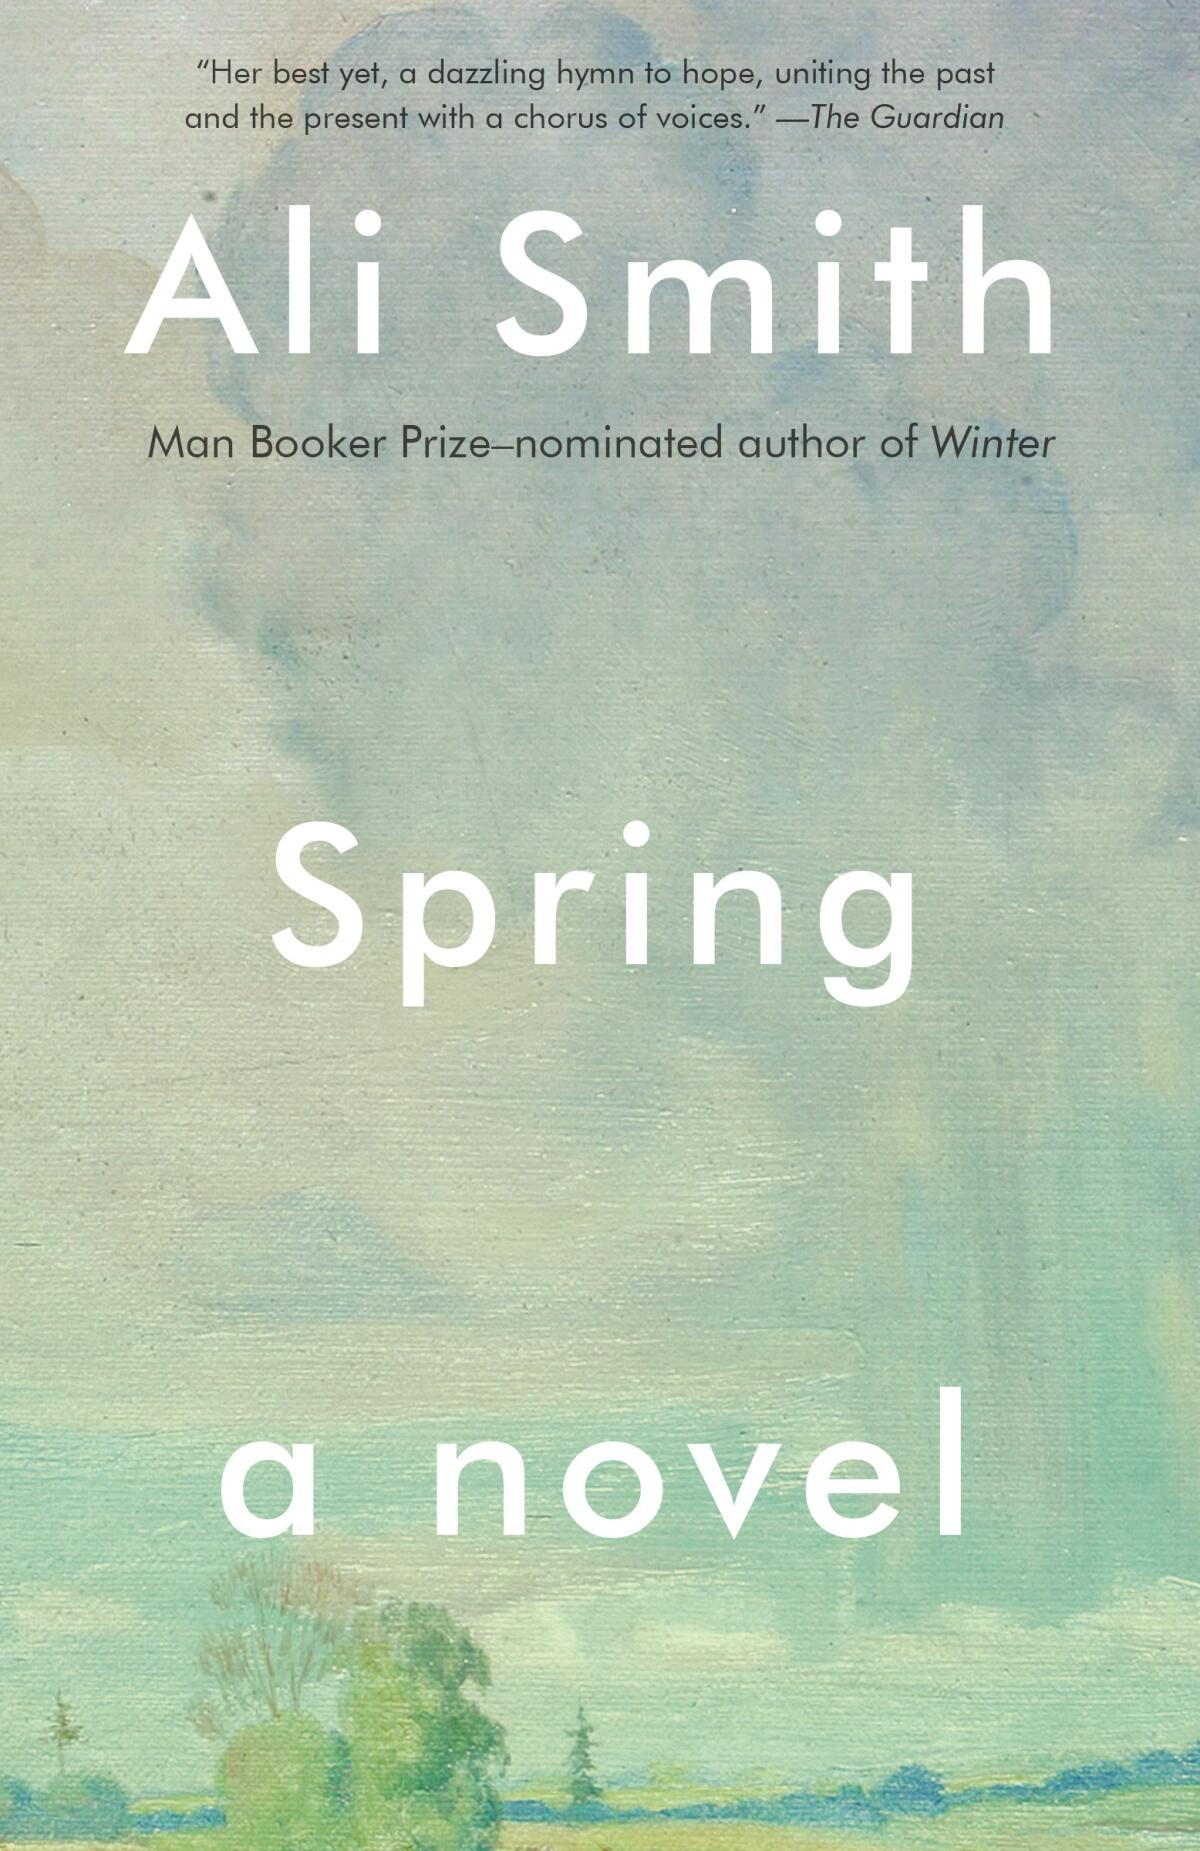 A book jacket for Ali Smith's "Spring." Credit: Pantheon